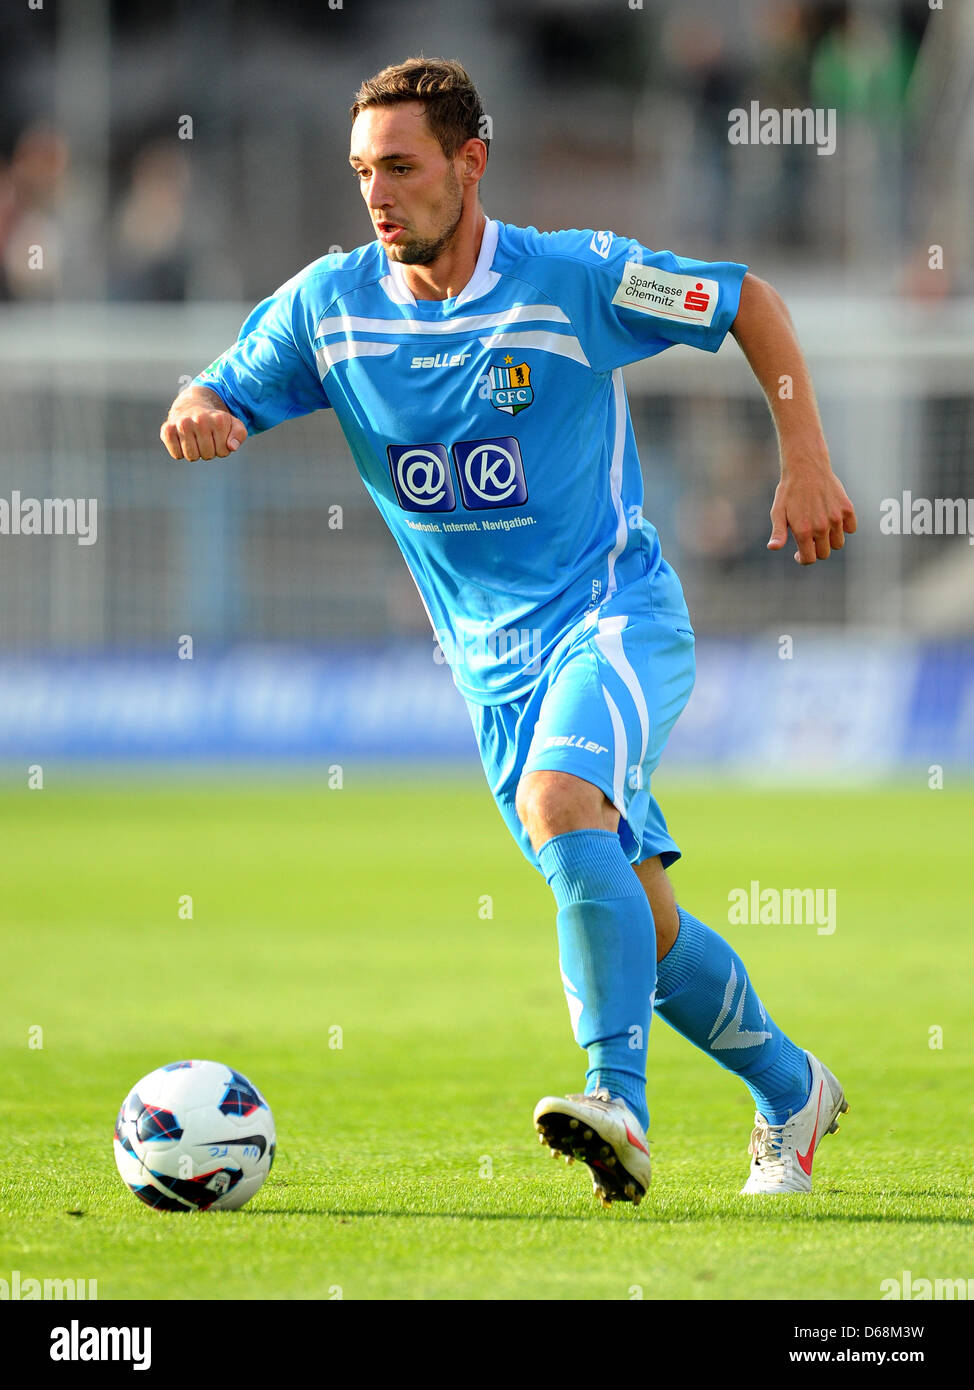 Chemnitzer Fc High Resolution Stock Photography and Images - Alamy